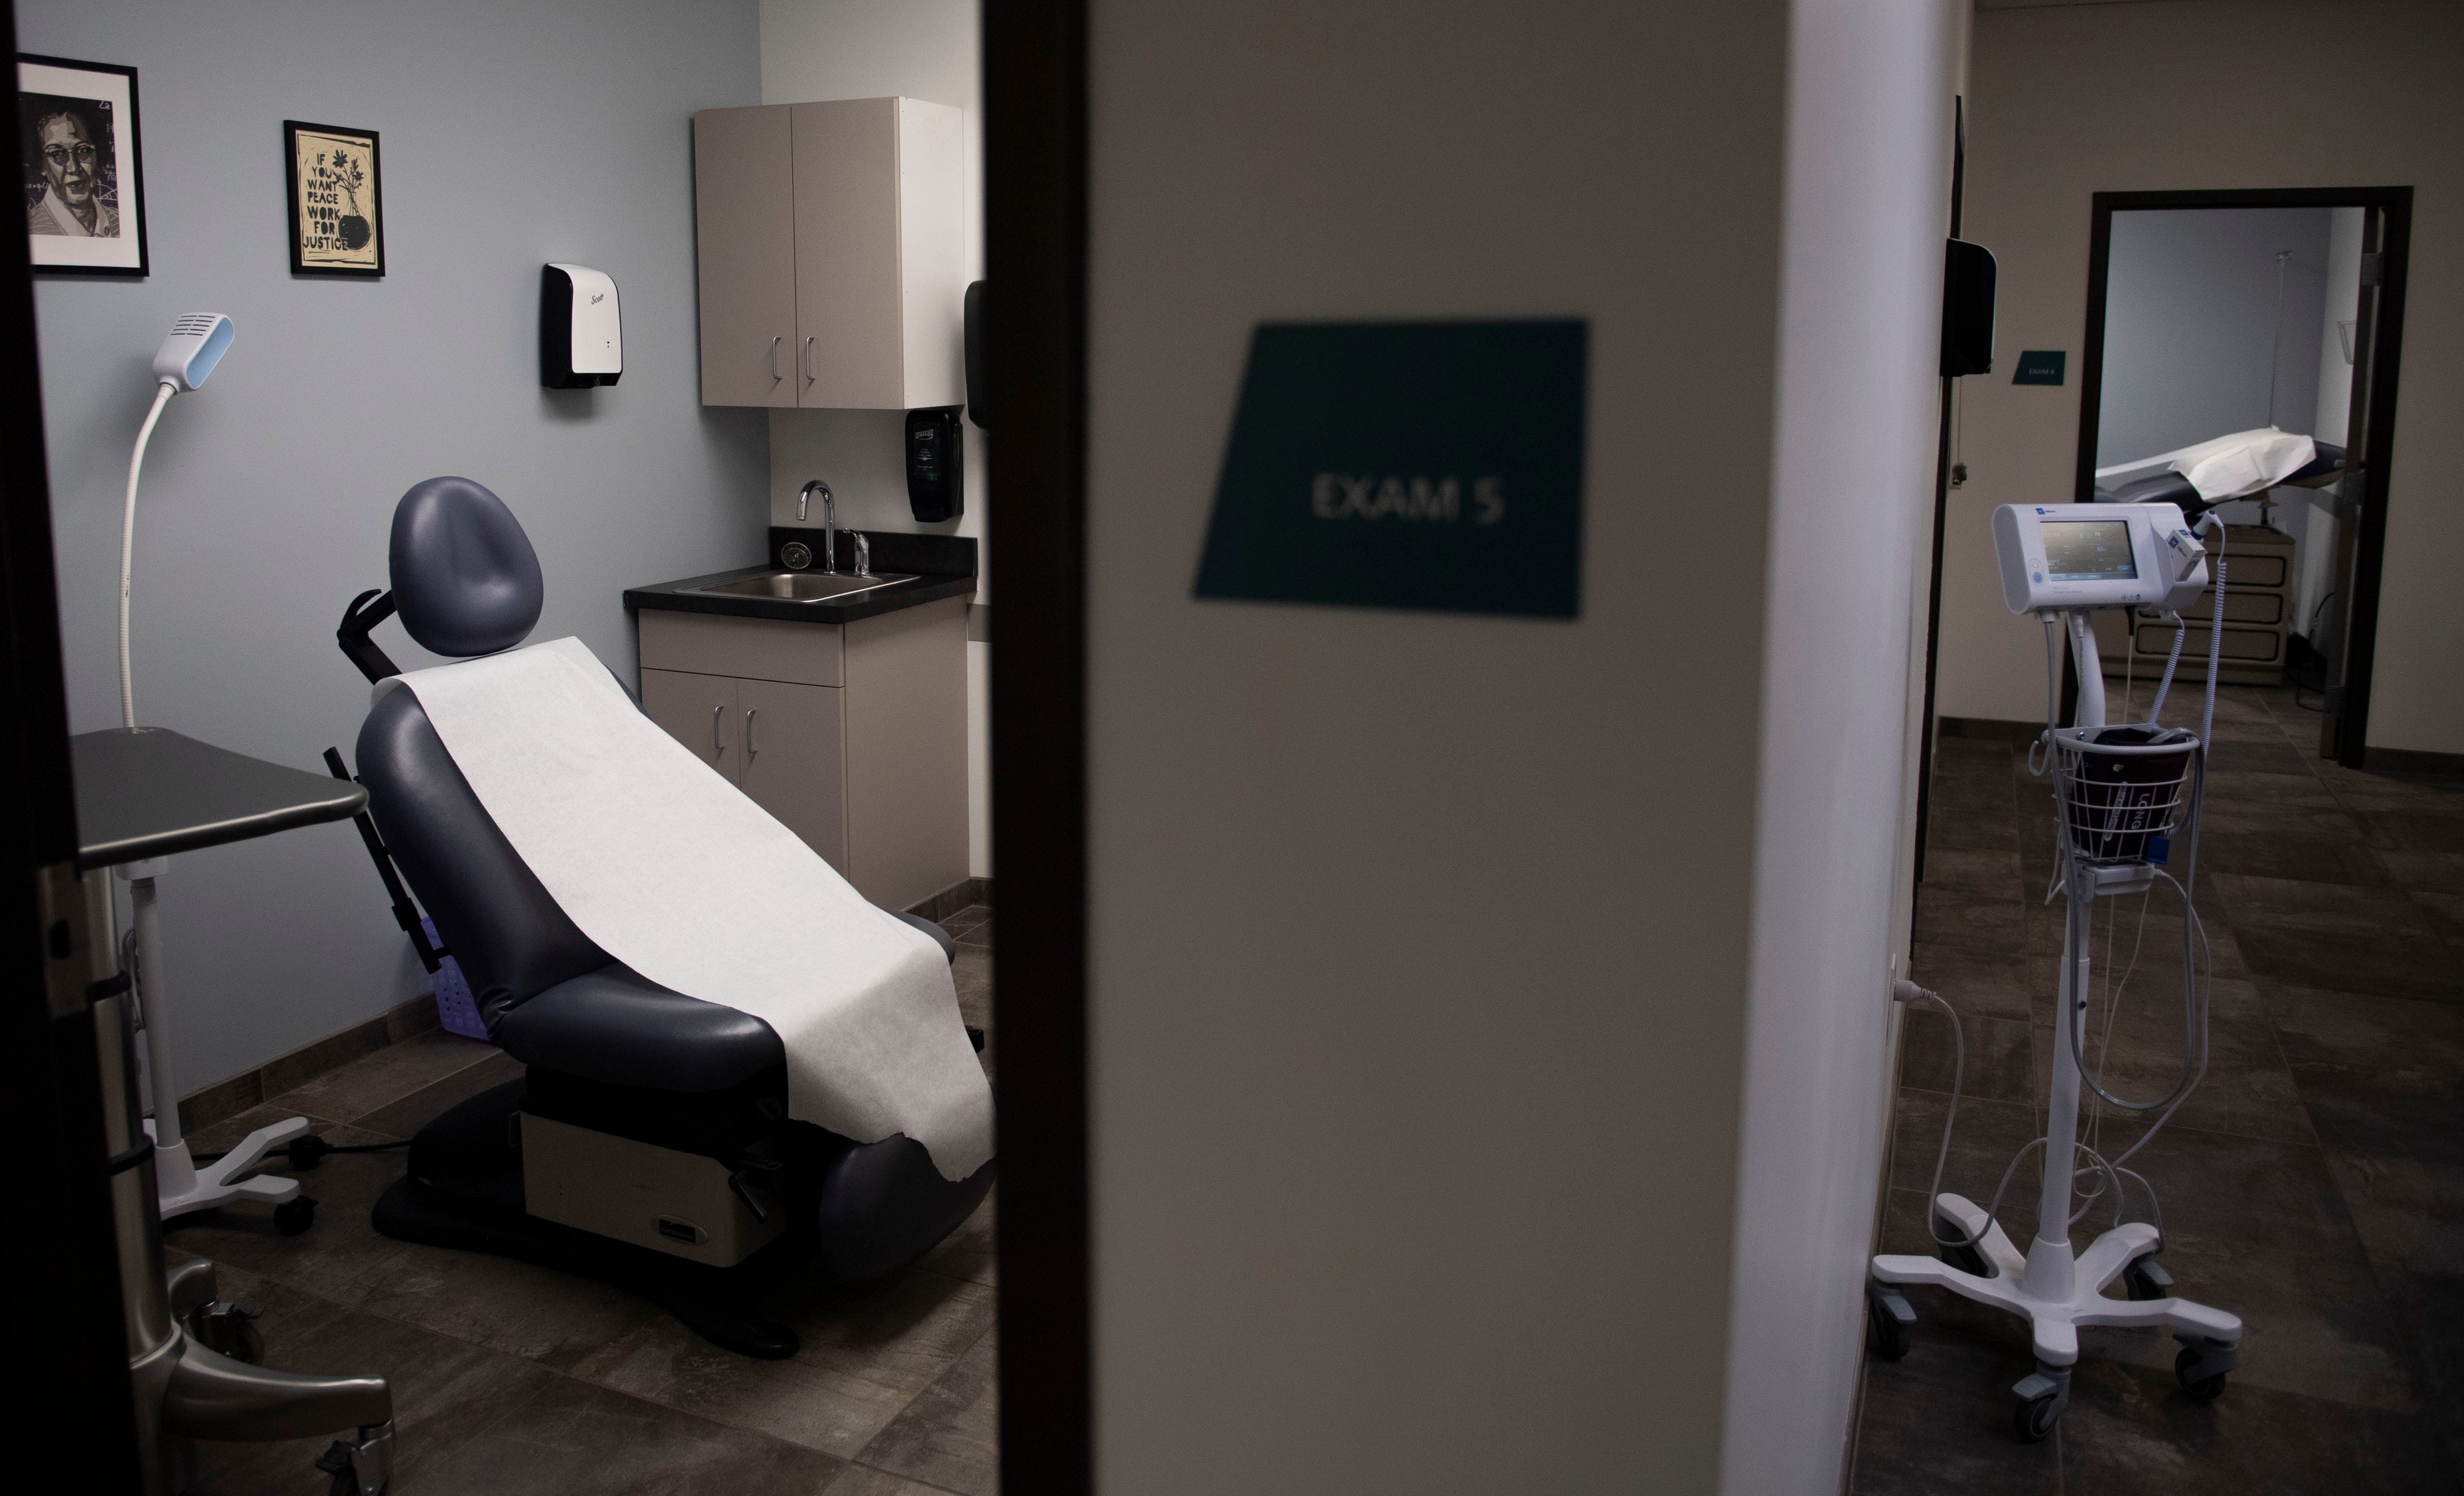 A patient room at Choices Center for Reproductive Health, in December.